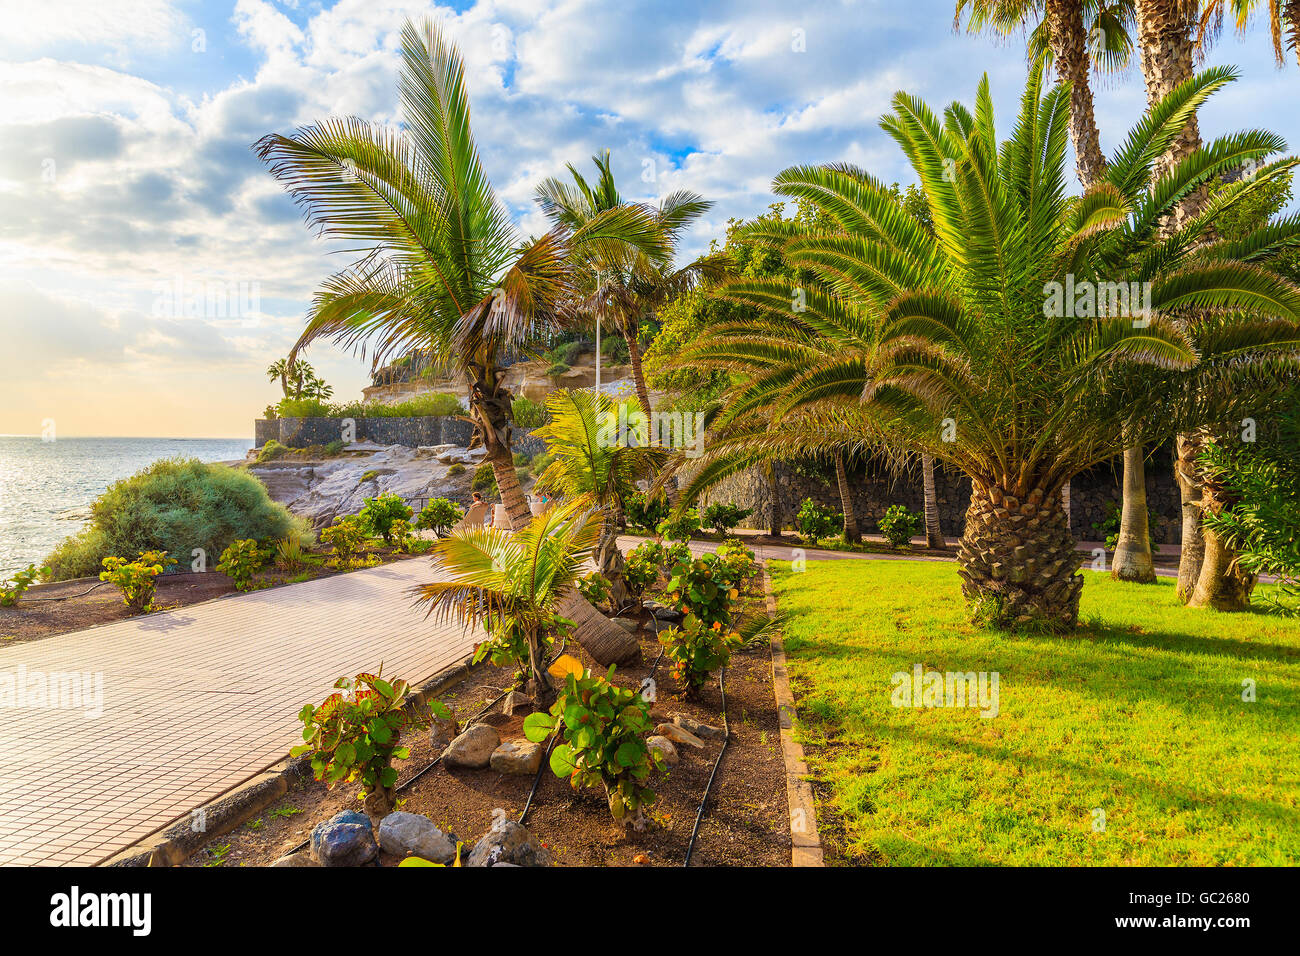 Exotic coastal promenade with palm trees in Costa Adeje holiday town, Tenerife, Canary Islands, Spain Stock Photo